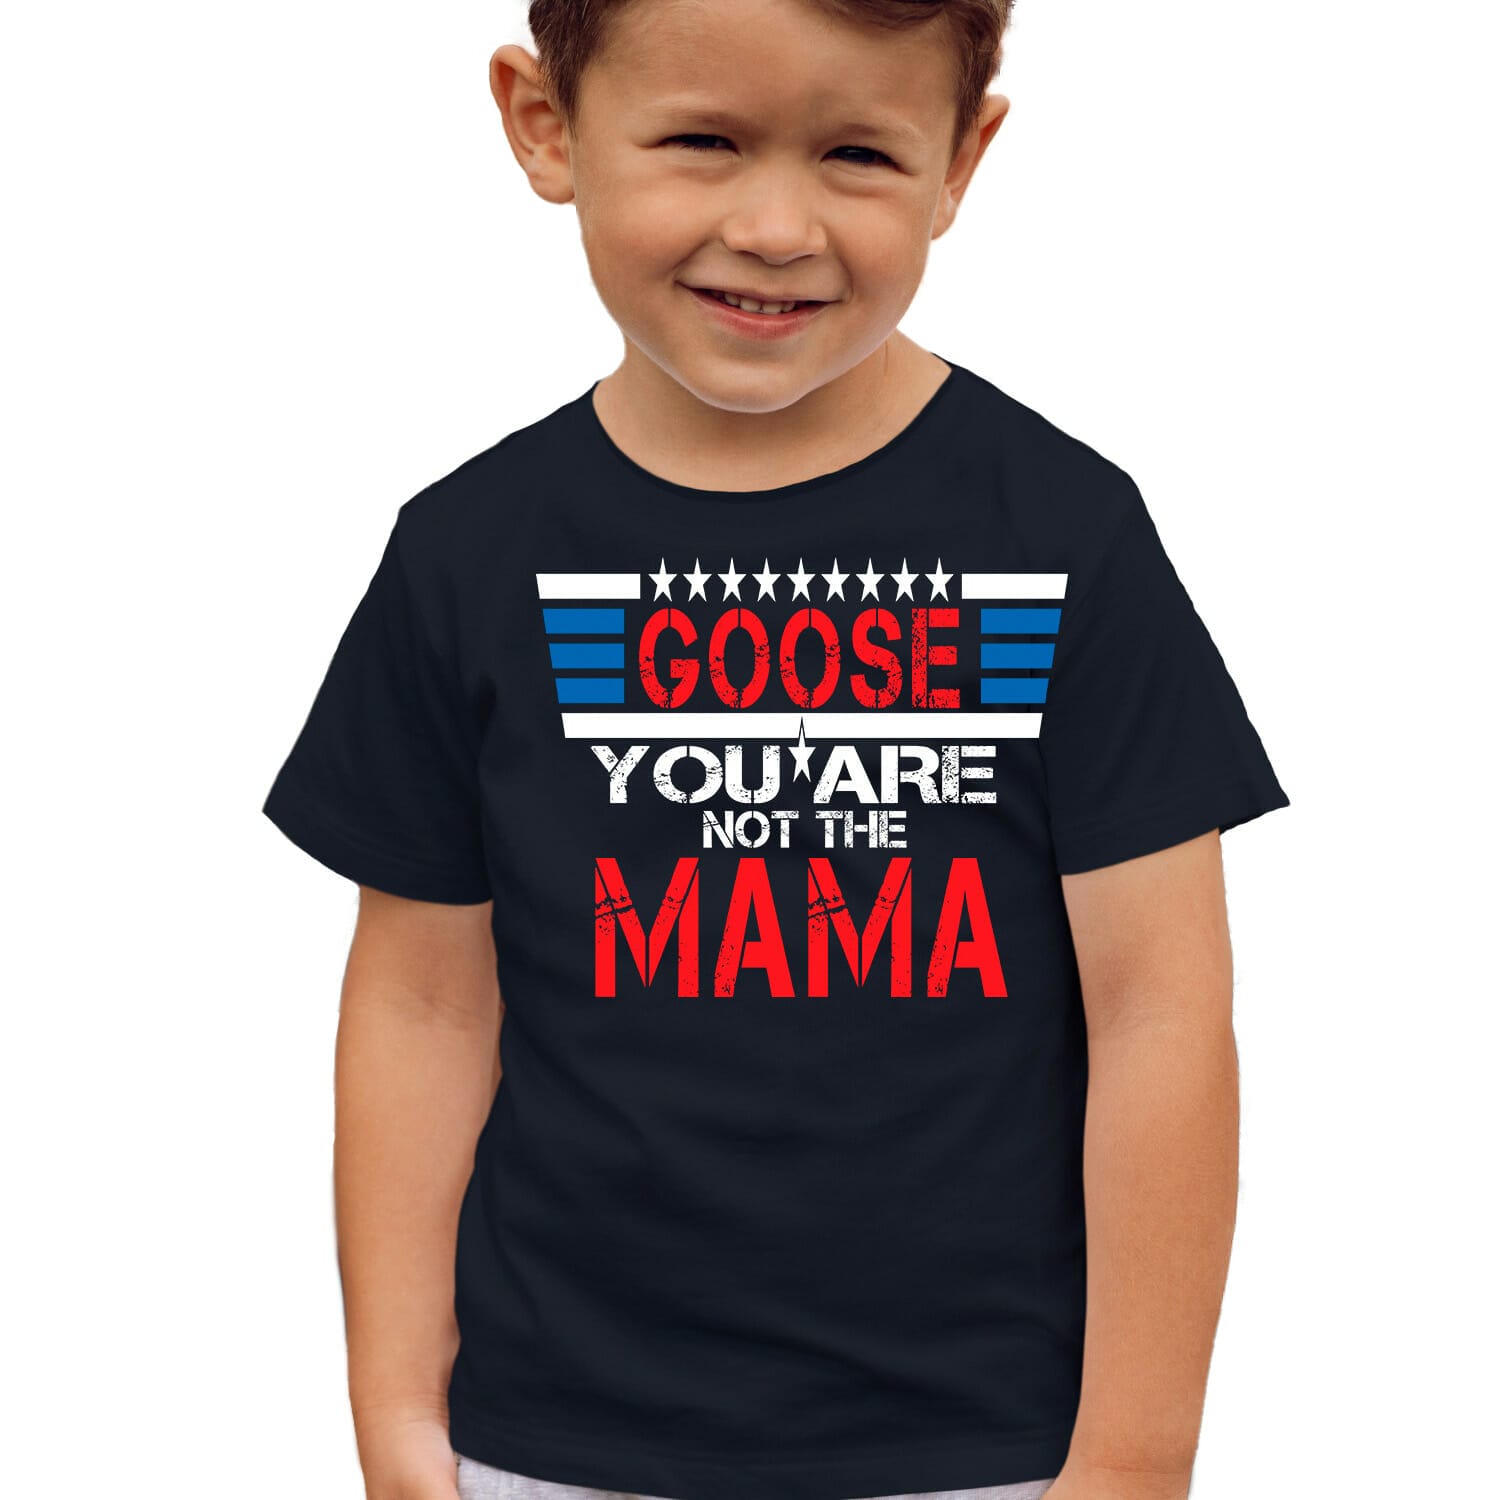 Goose - You are not the mama tshirt design